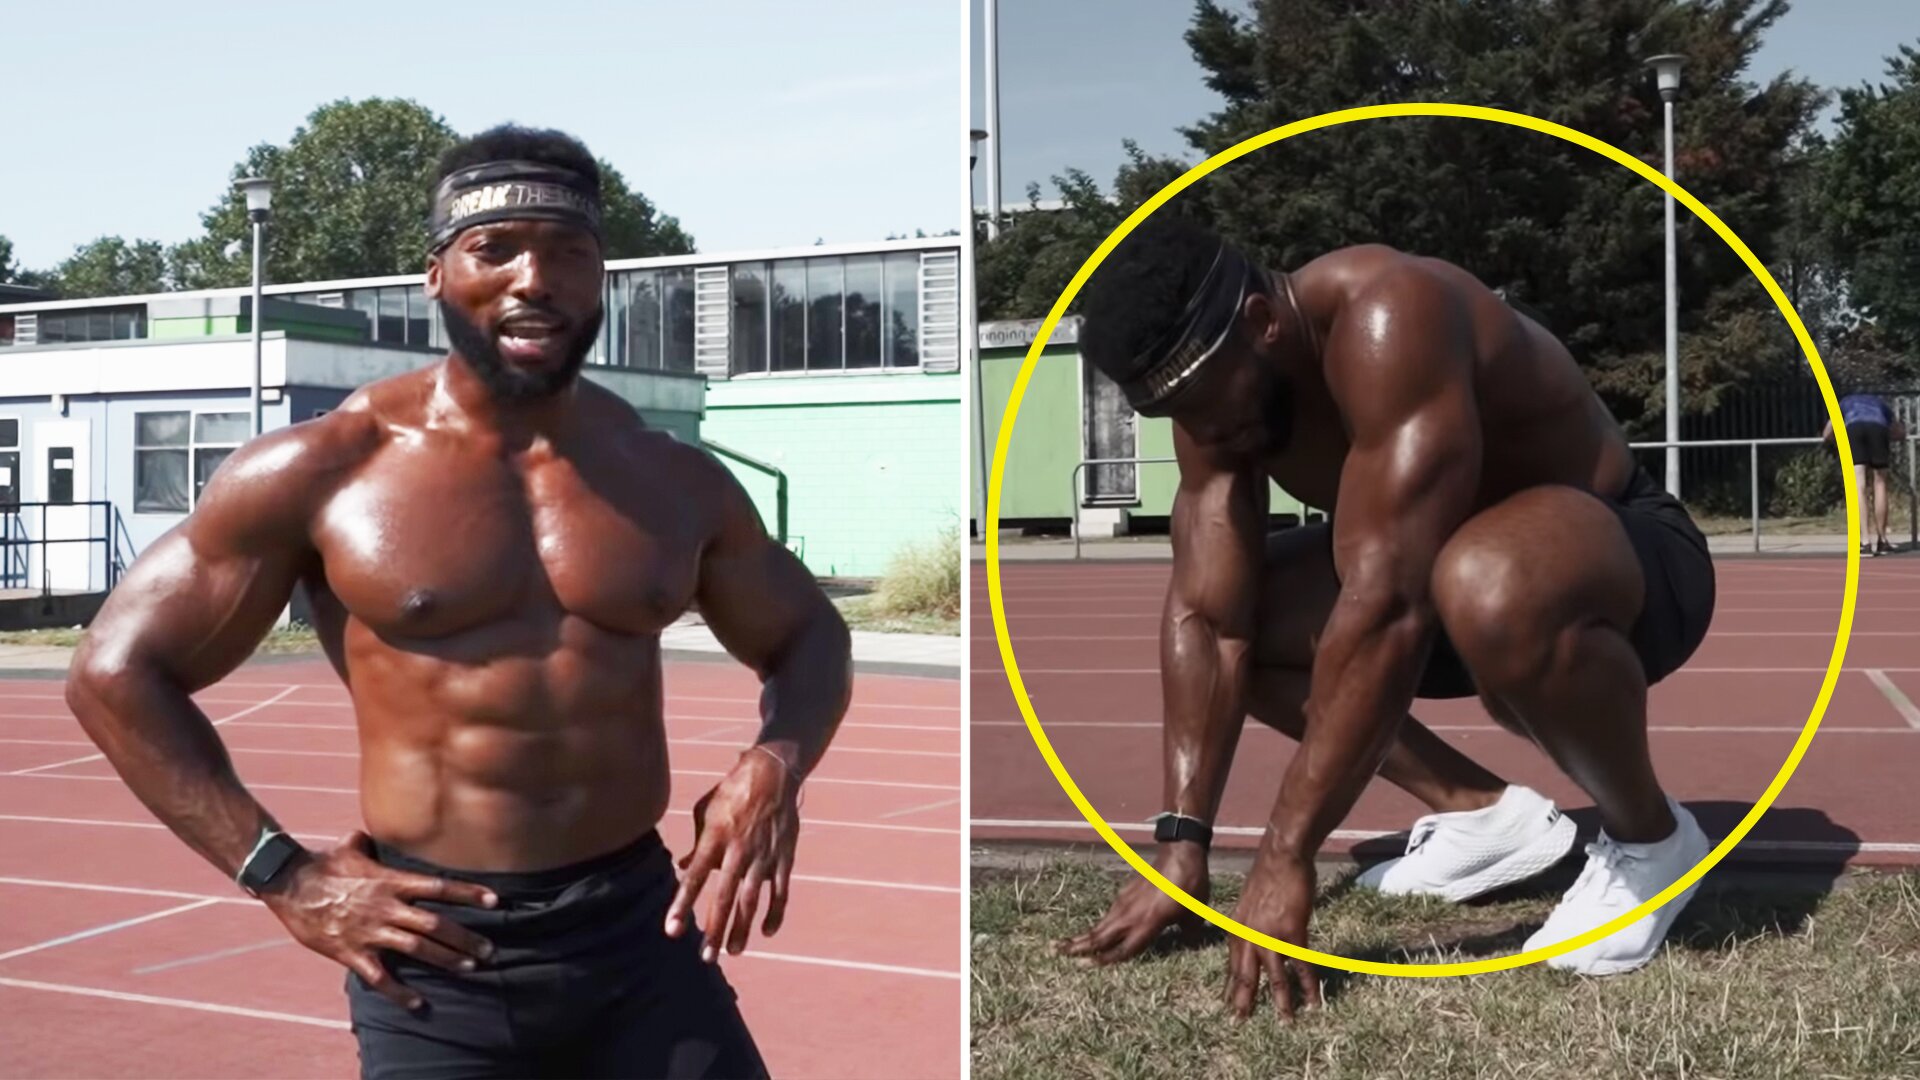 If you ever wondered how a bodybuilder would cope playing rugby - watch this